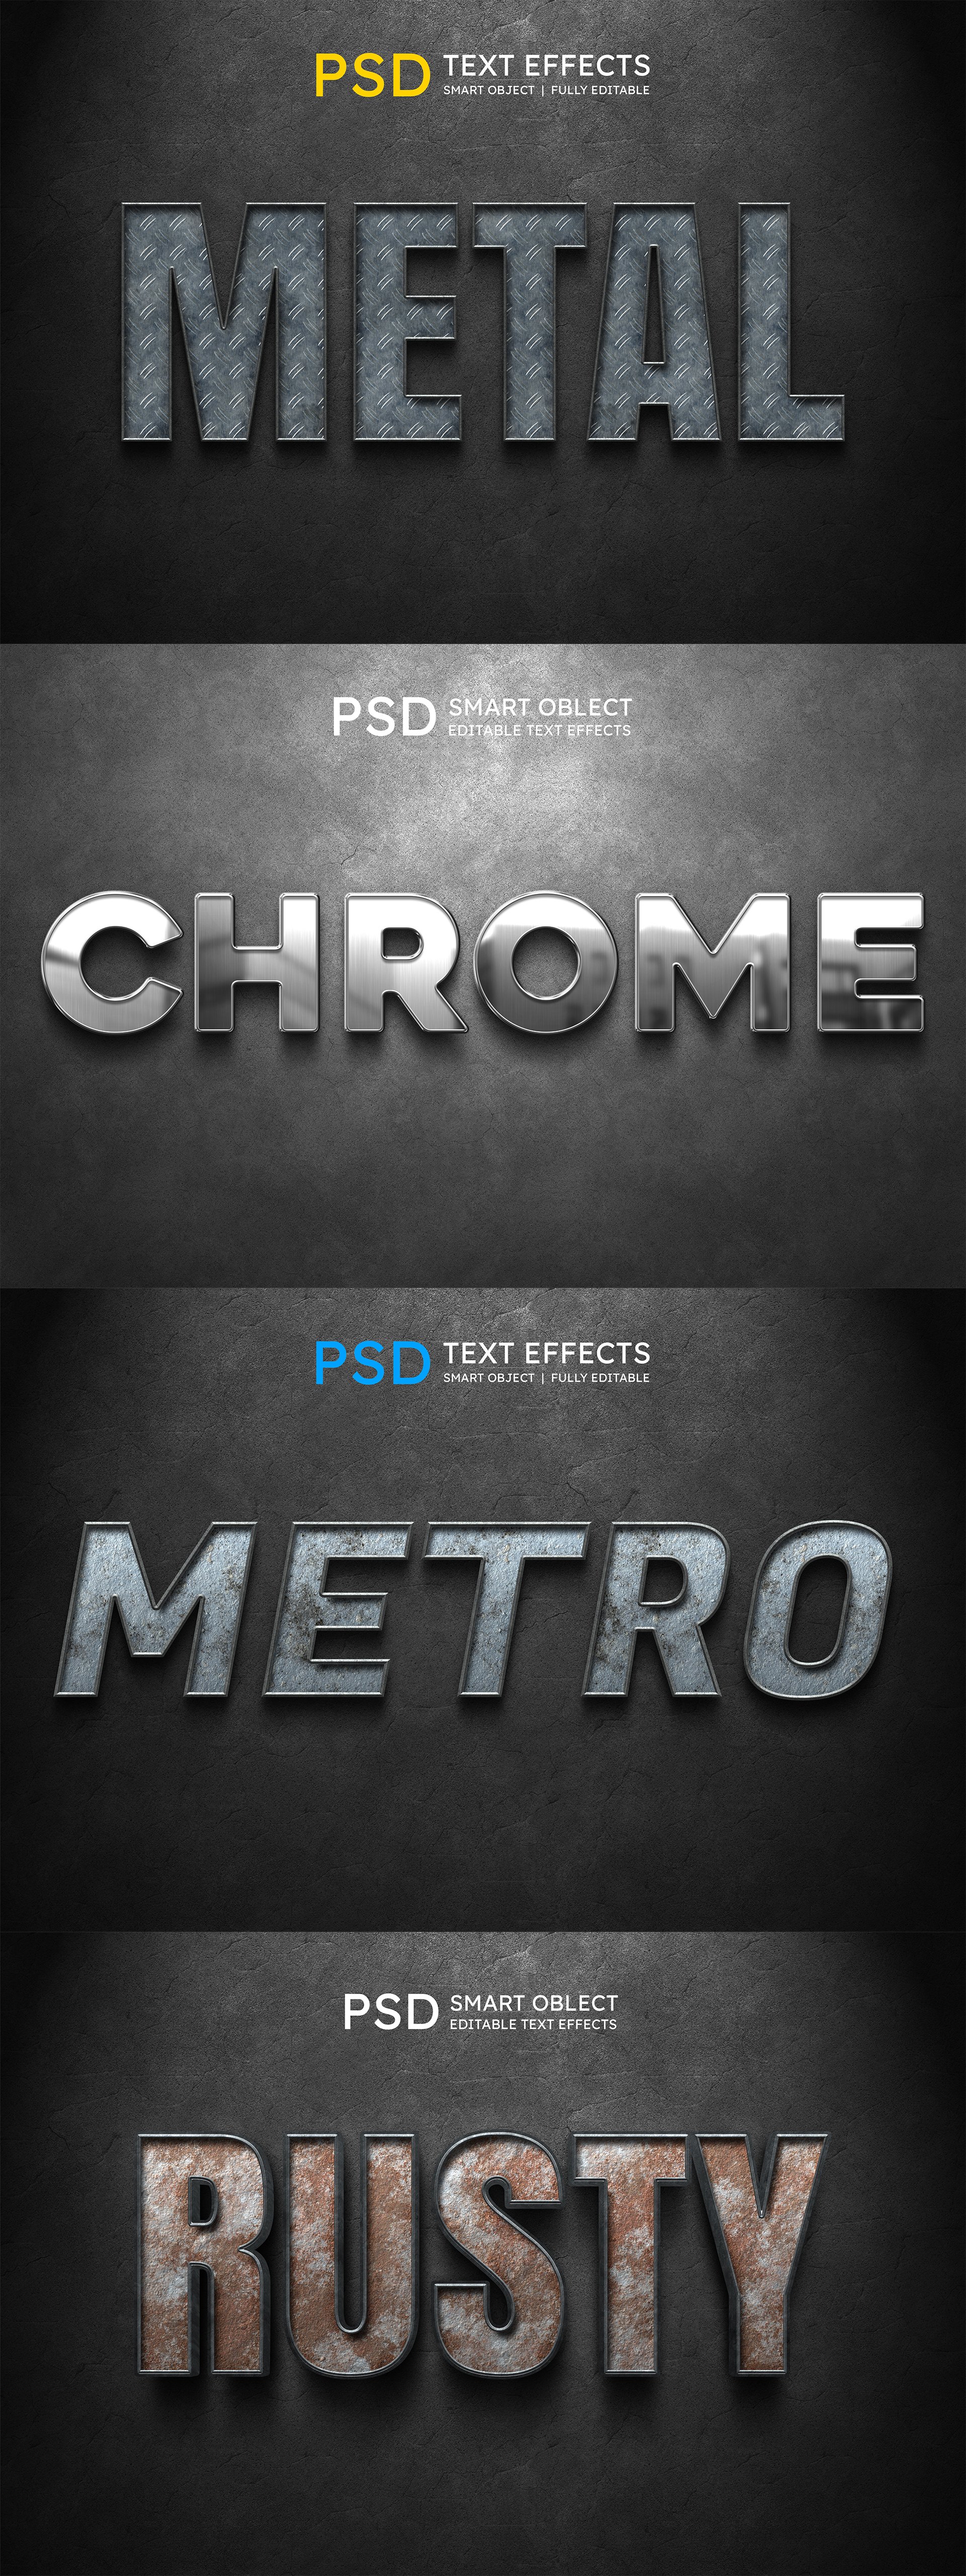 Metal Text Effect Stylepreview image.